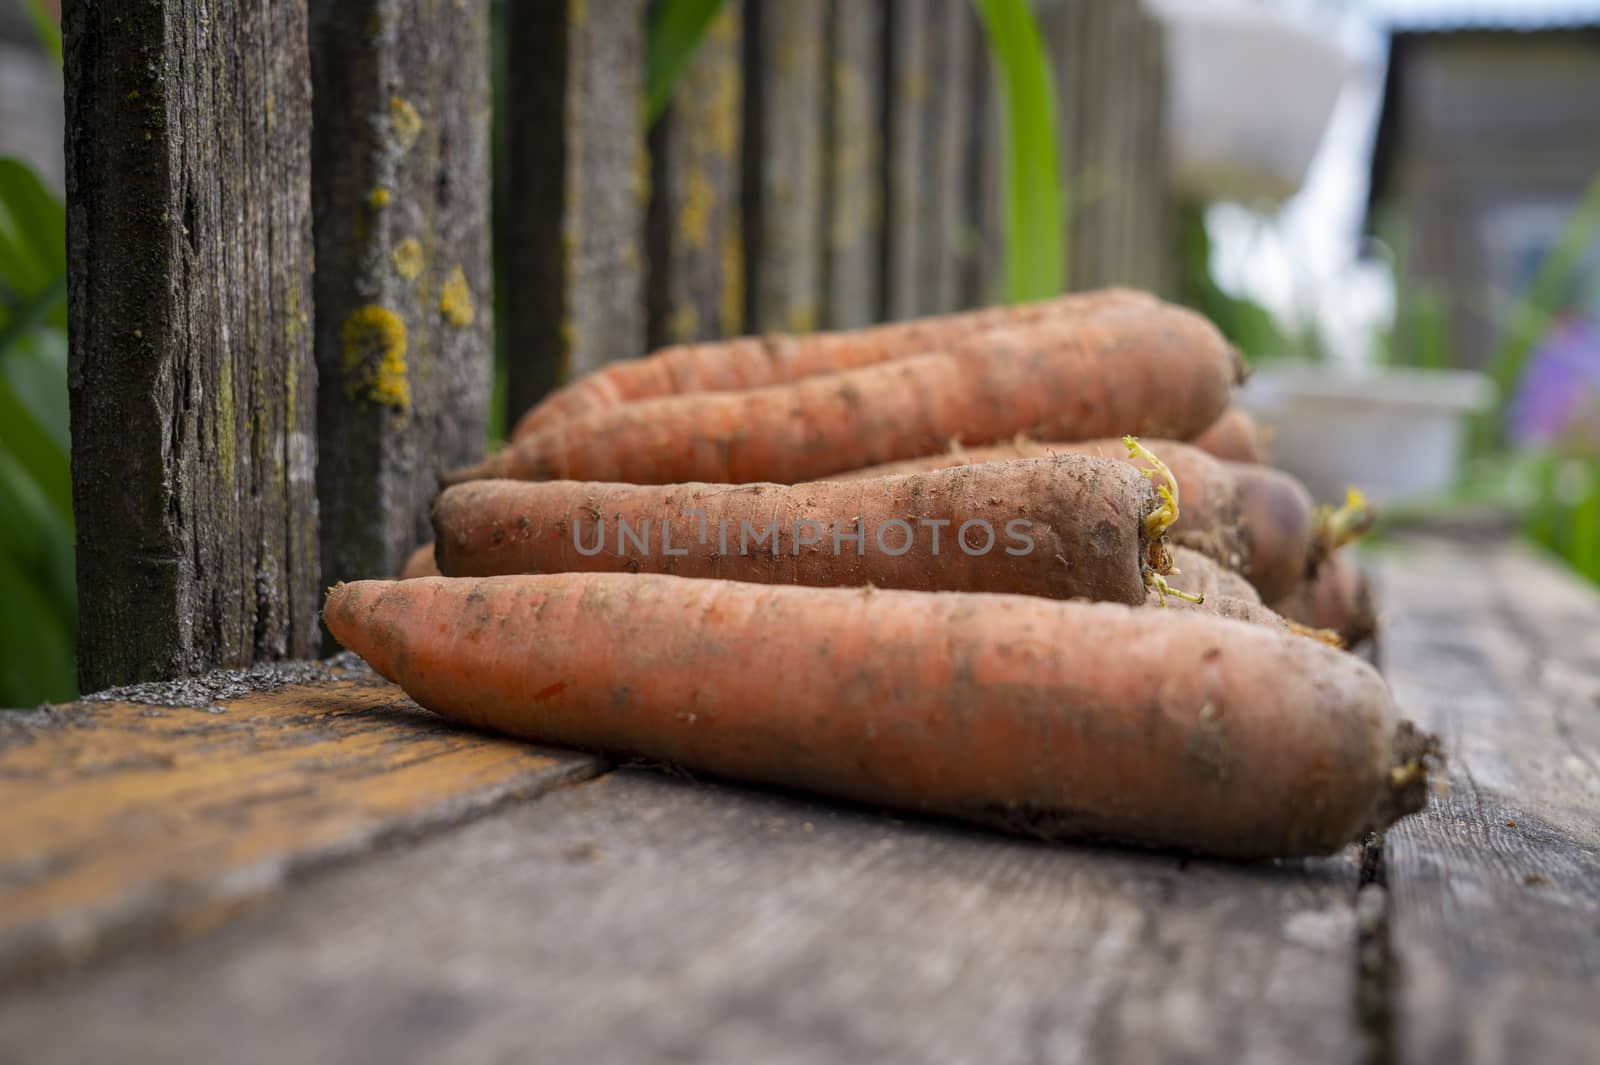 Freshly harvested bunch of carrots on a garden table outdoors against a rustic weathered wooden fence in a low angle view